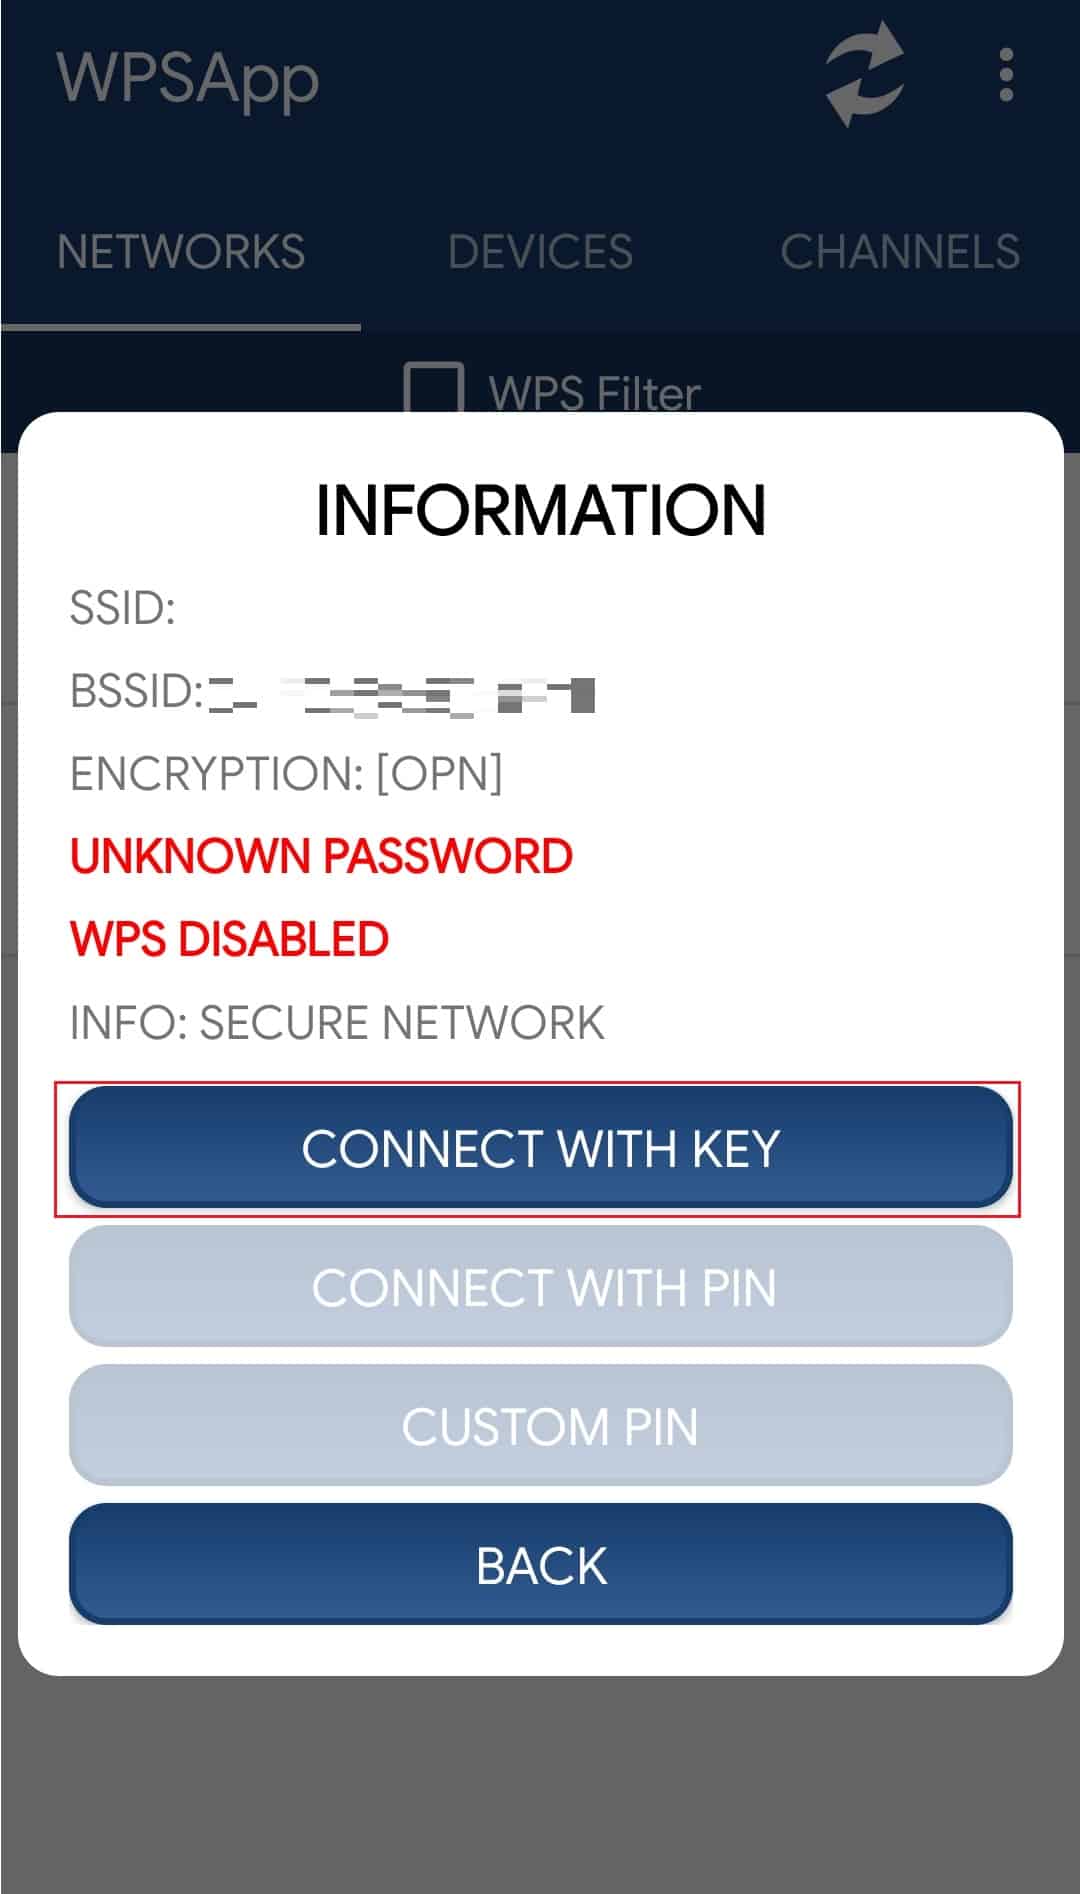 connect with key in WPSApp android app